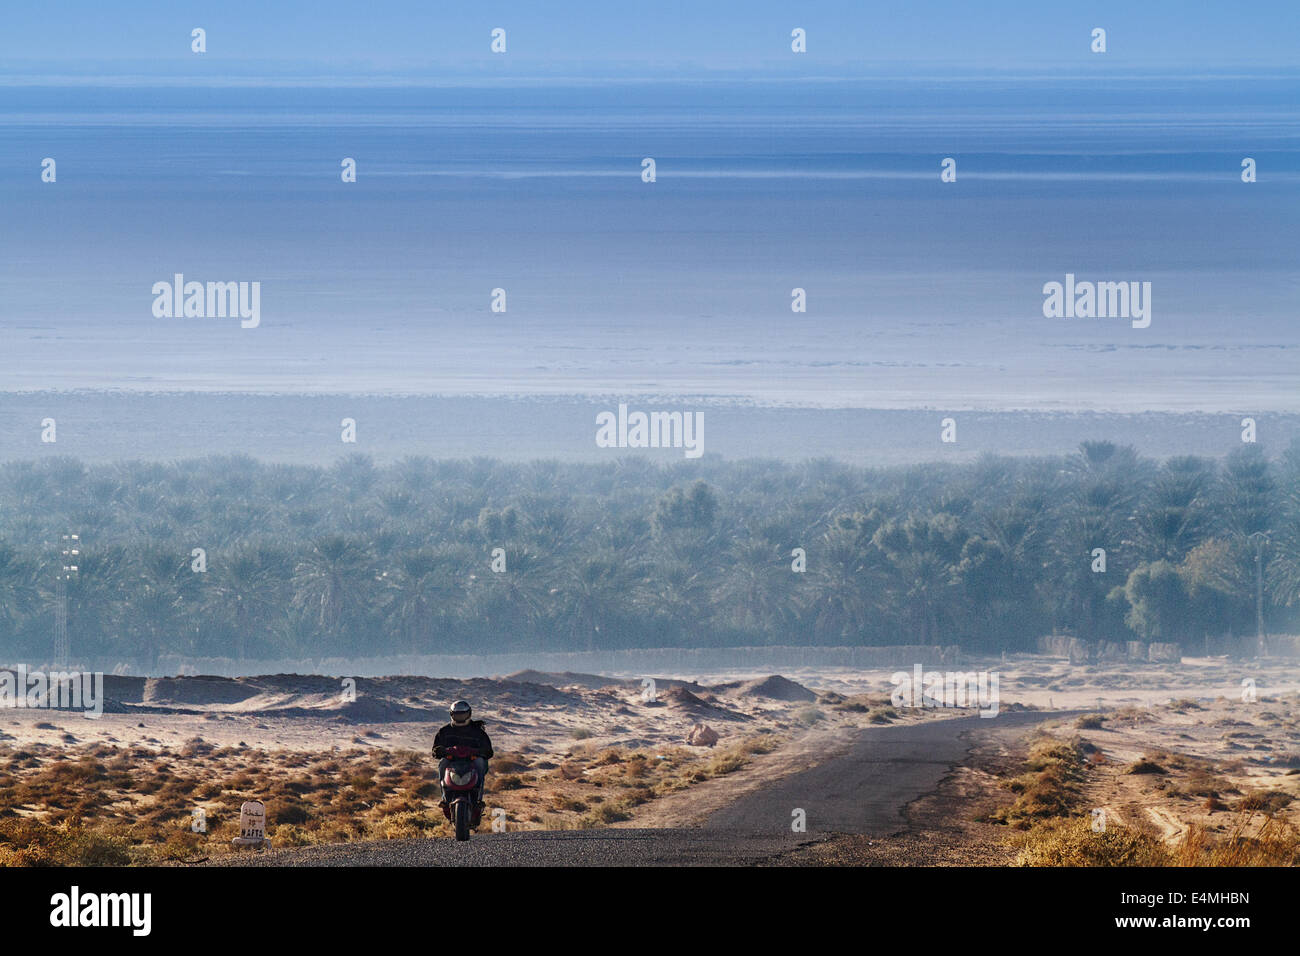 A motorcyclist on a road in the desert Stock Photo